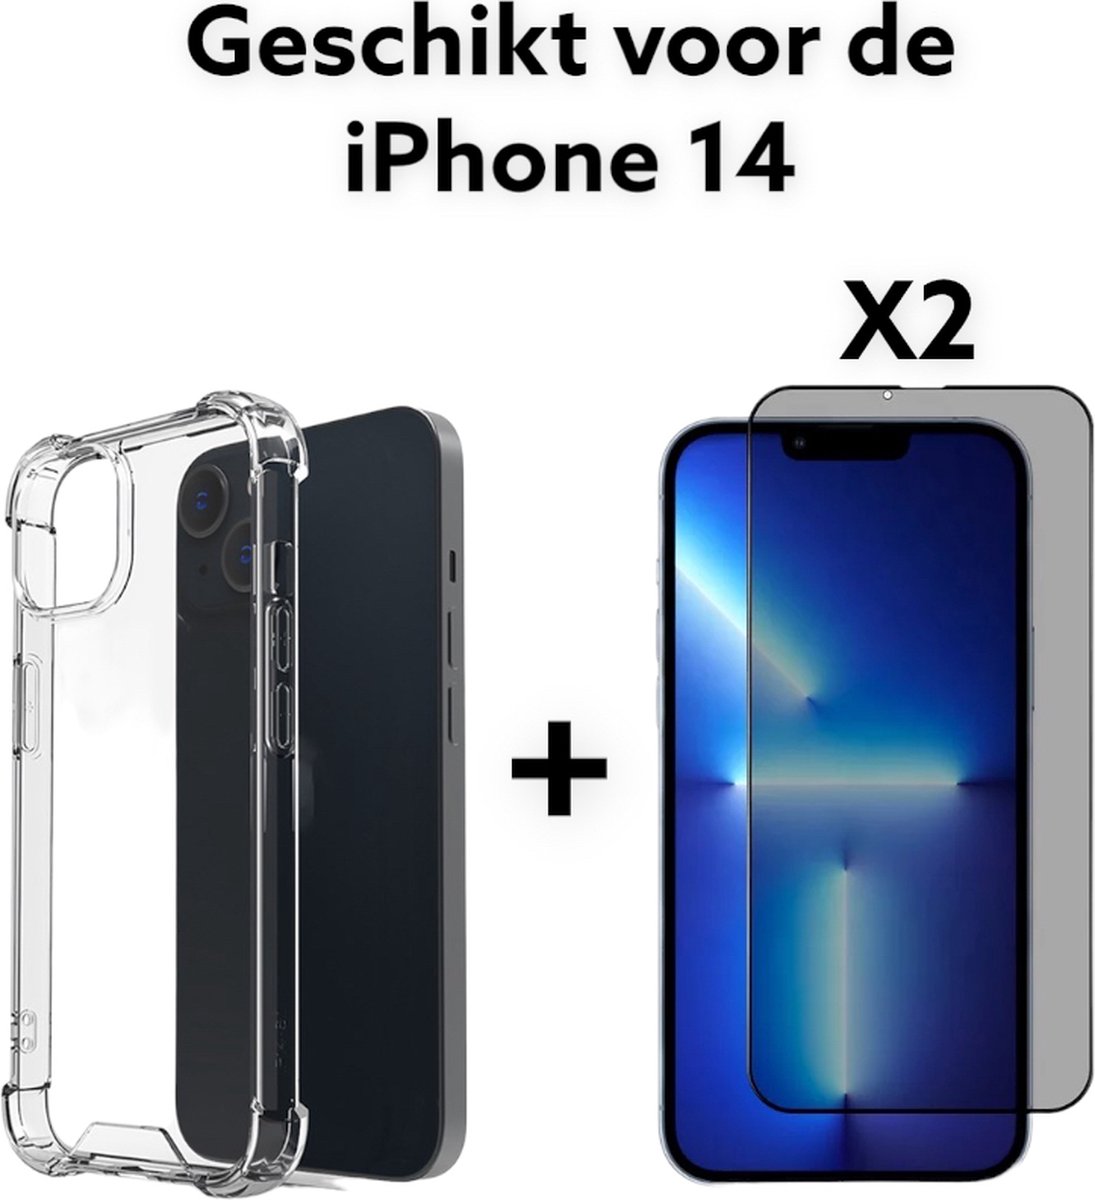 iPhone 14 Hoesje Transparant + 2x privacy screenprotector - iPhone 14 Hoesje Anti Shock - iPhone 14 Anti Shock Case Antishock Shock Proof + 2x privacy tempered glas 3D